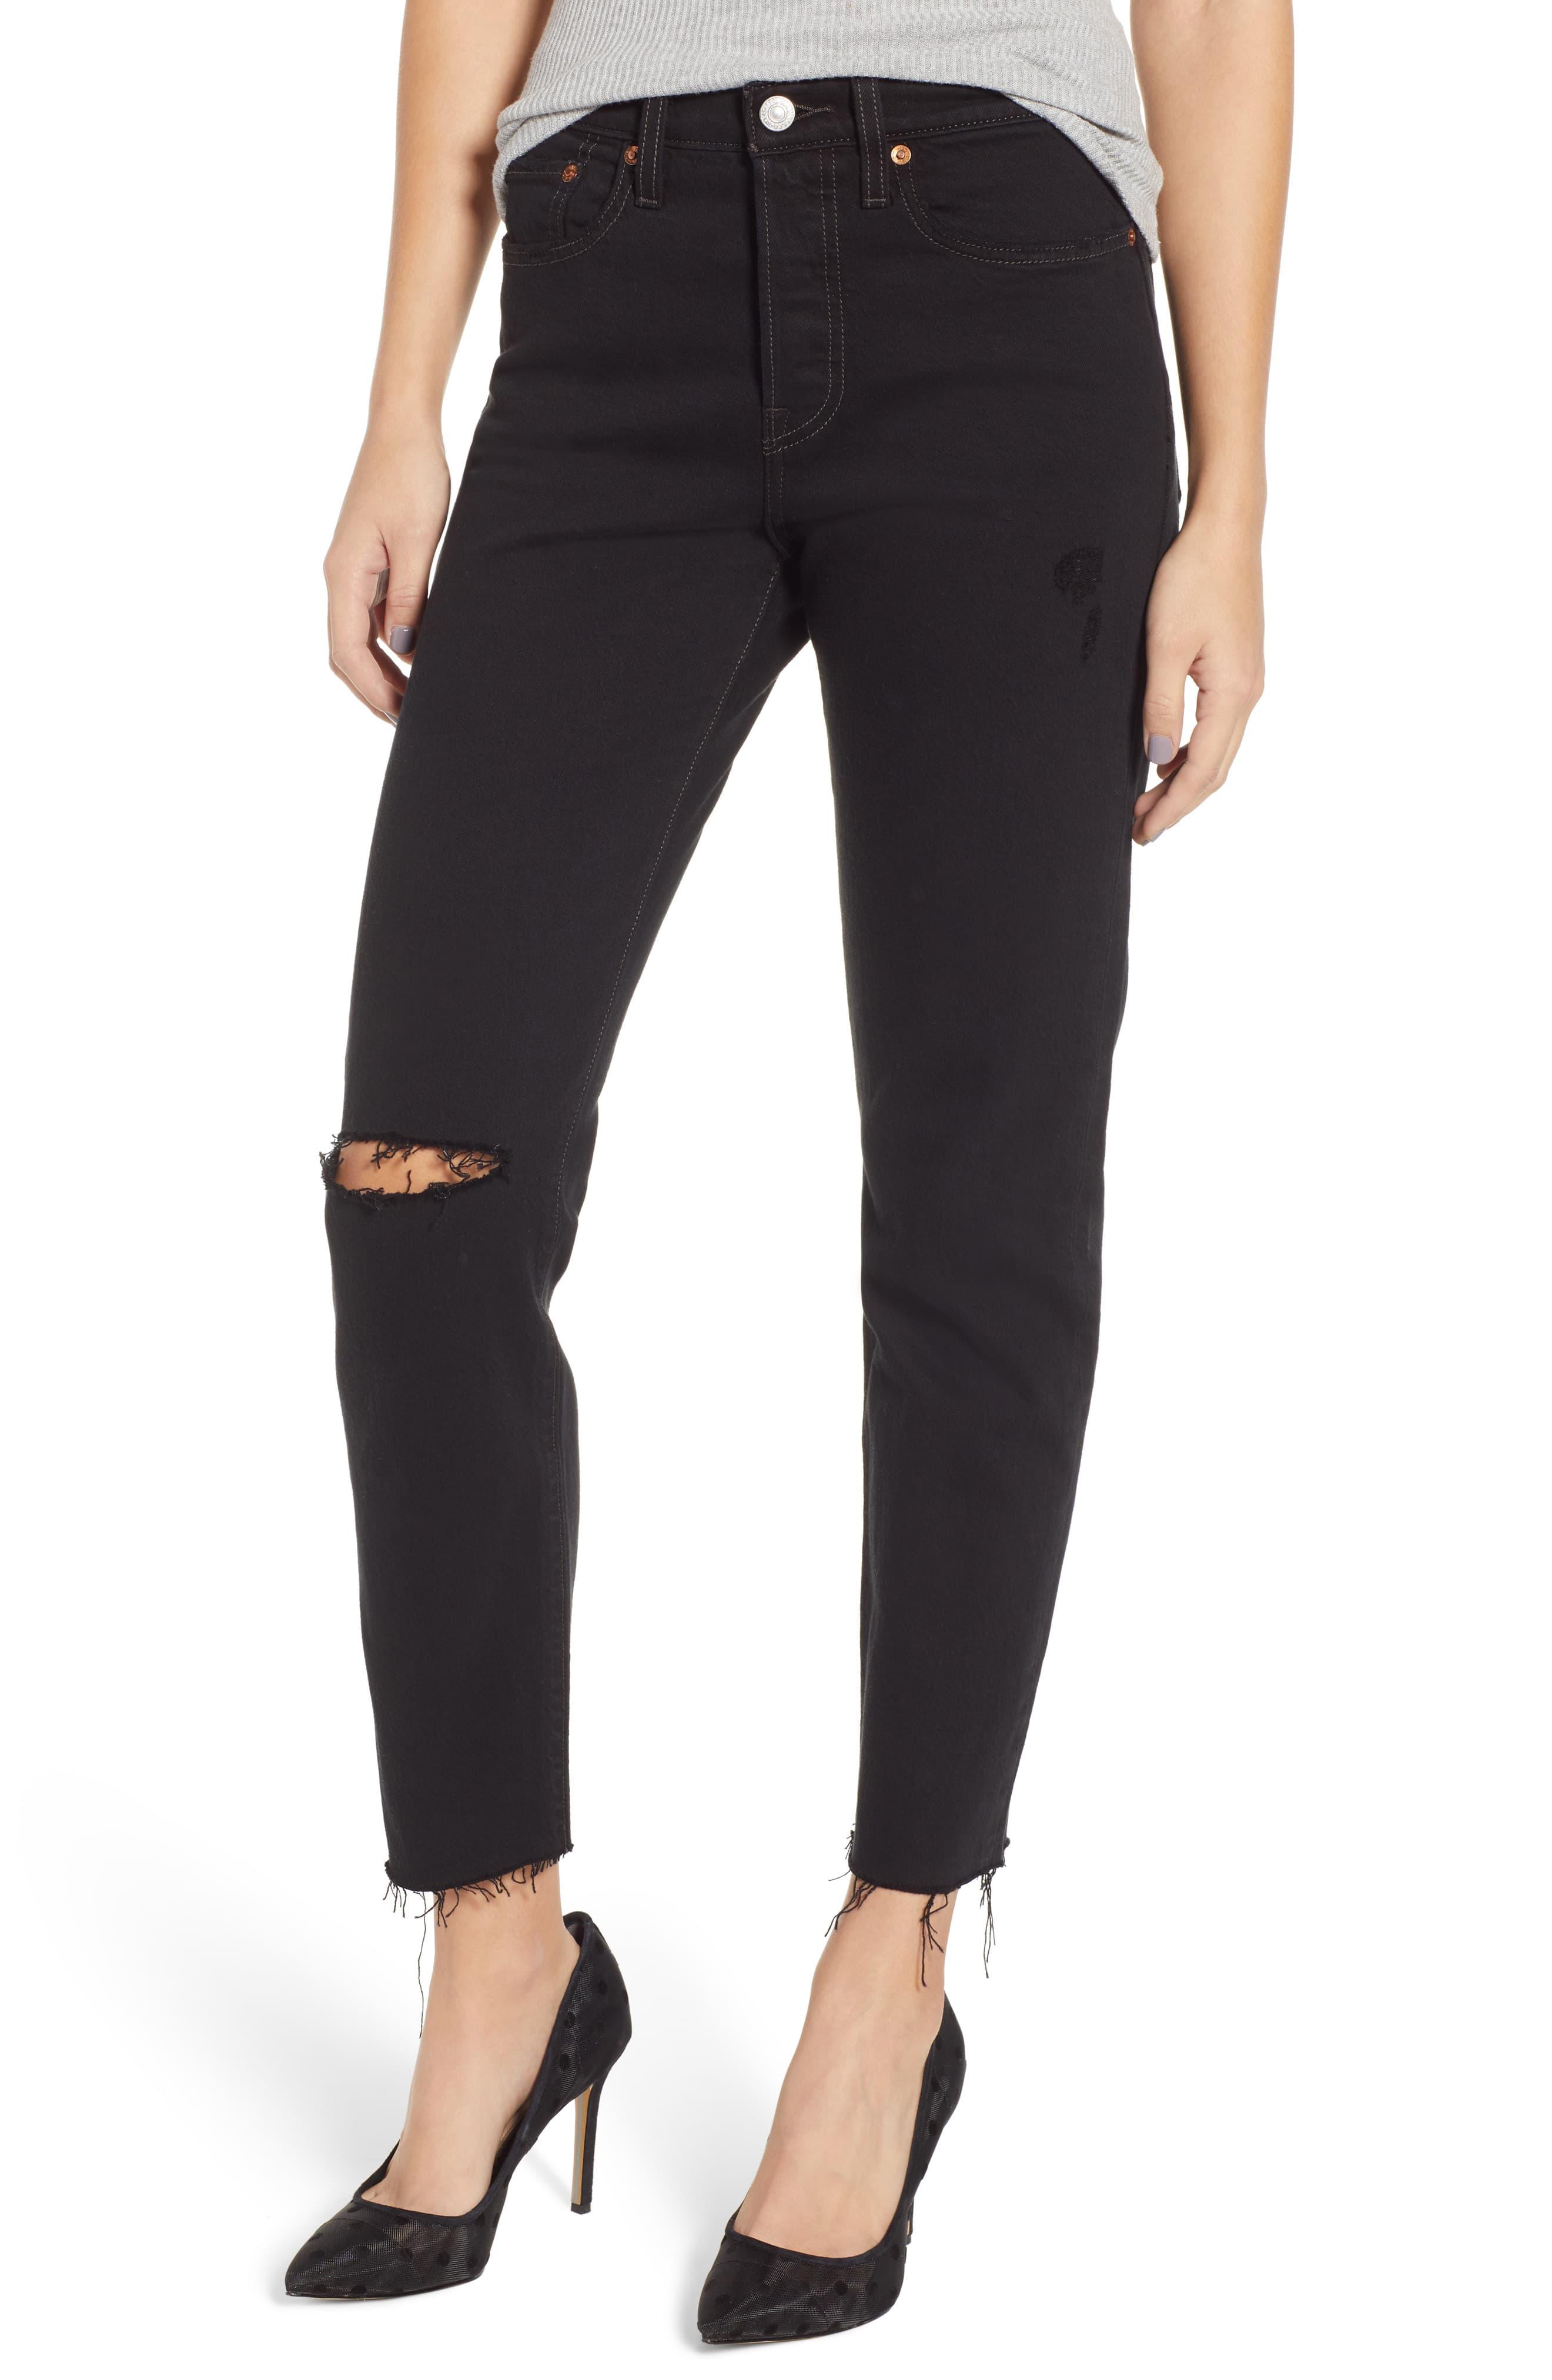 Levi's Wedgie Icon Fit High Waist Ripped Skinny Jeans in Black - Lyst